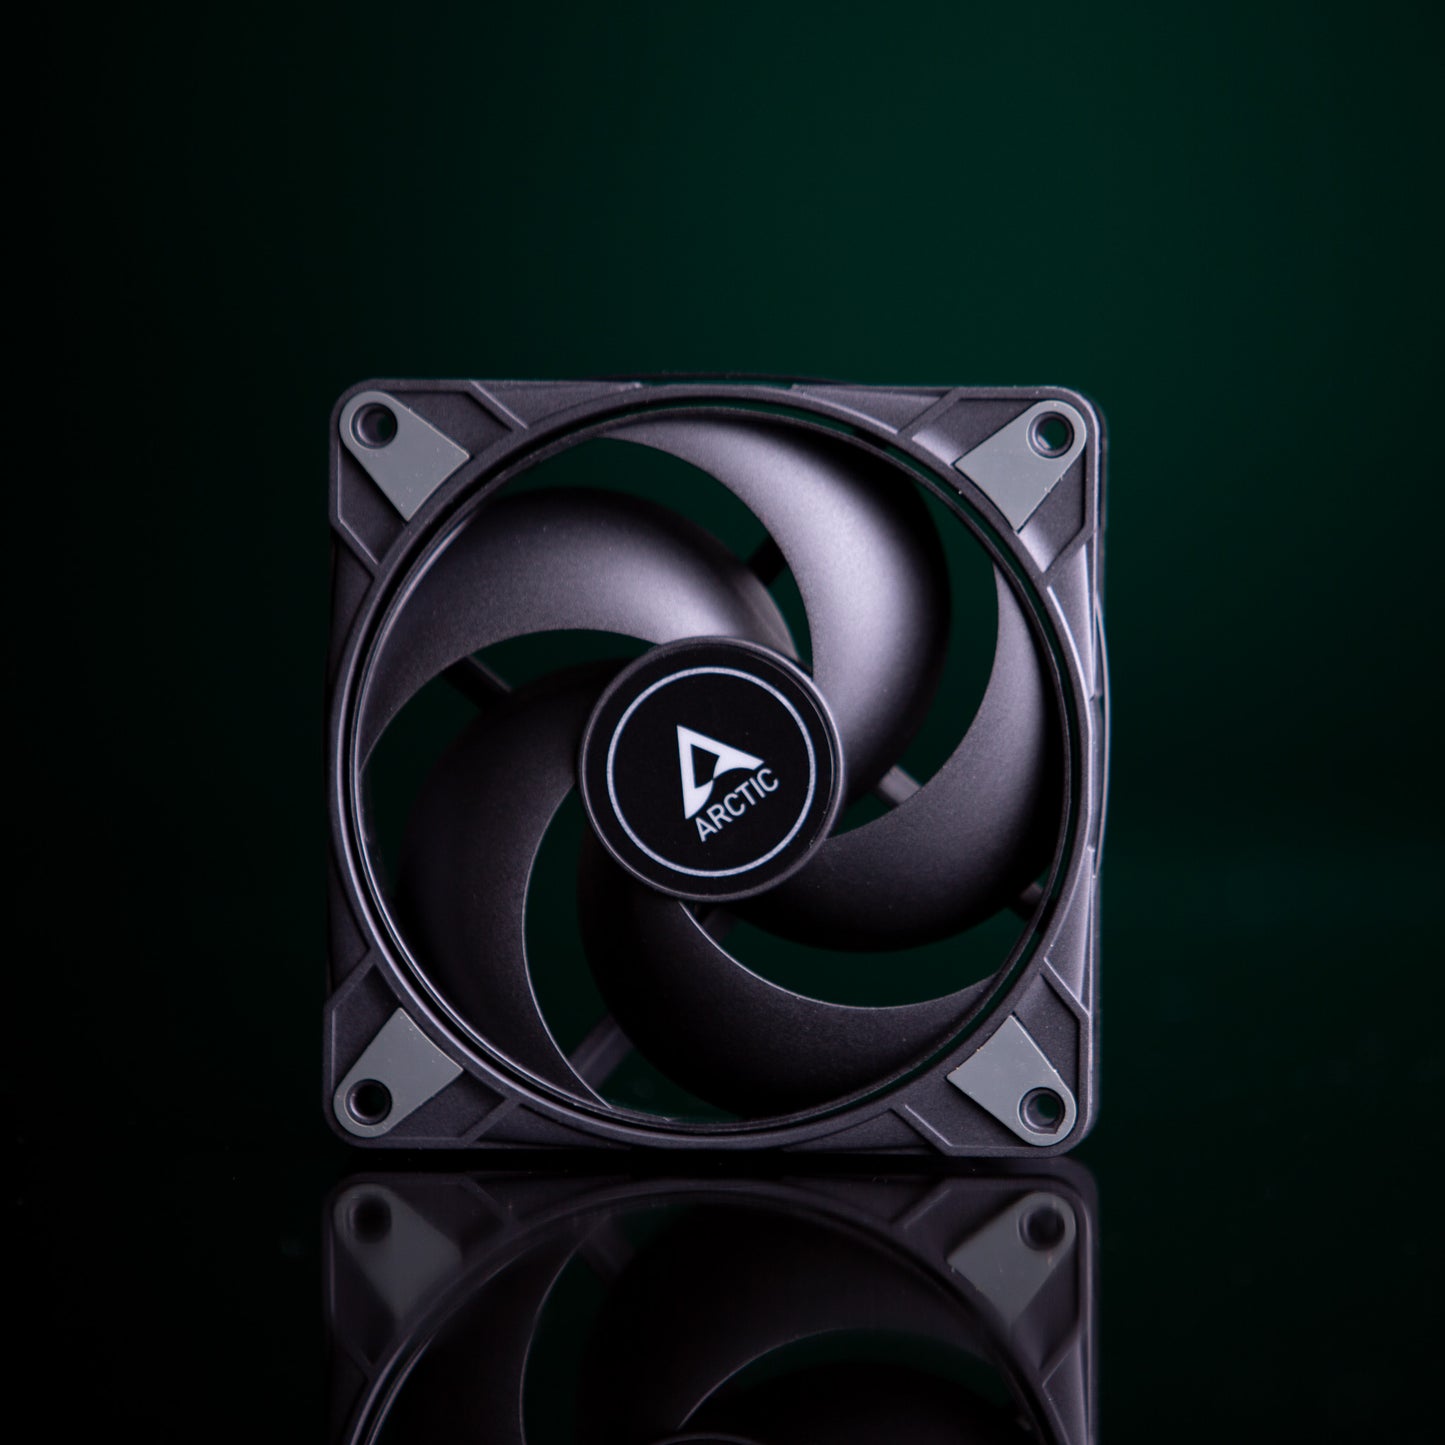 Arctic Cooling P12 MAX PWM 120mm High Performance Fan